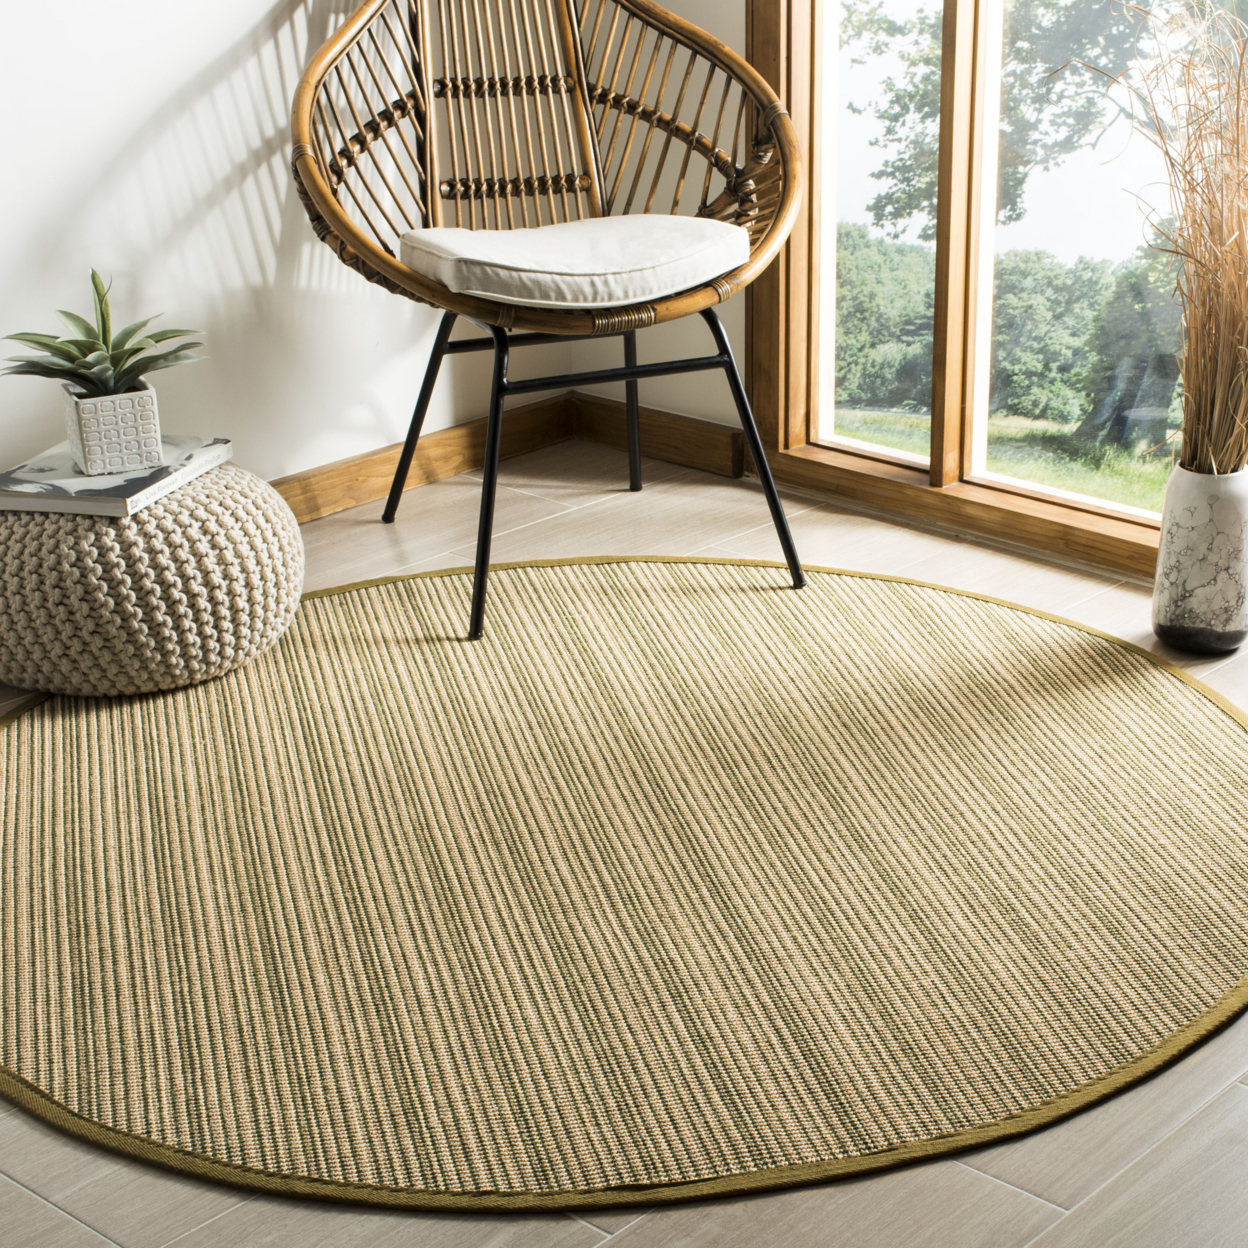 SAFAVIEH Natural Fiber Collection NF132A Multi/Green Rug - 6' Round